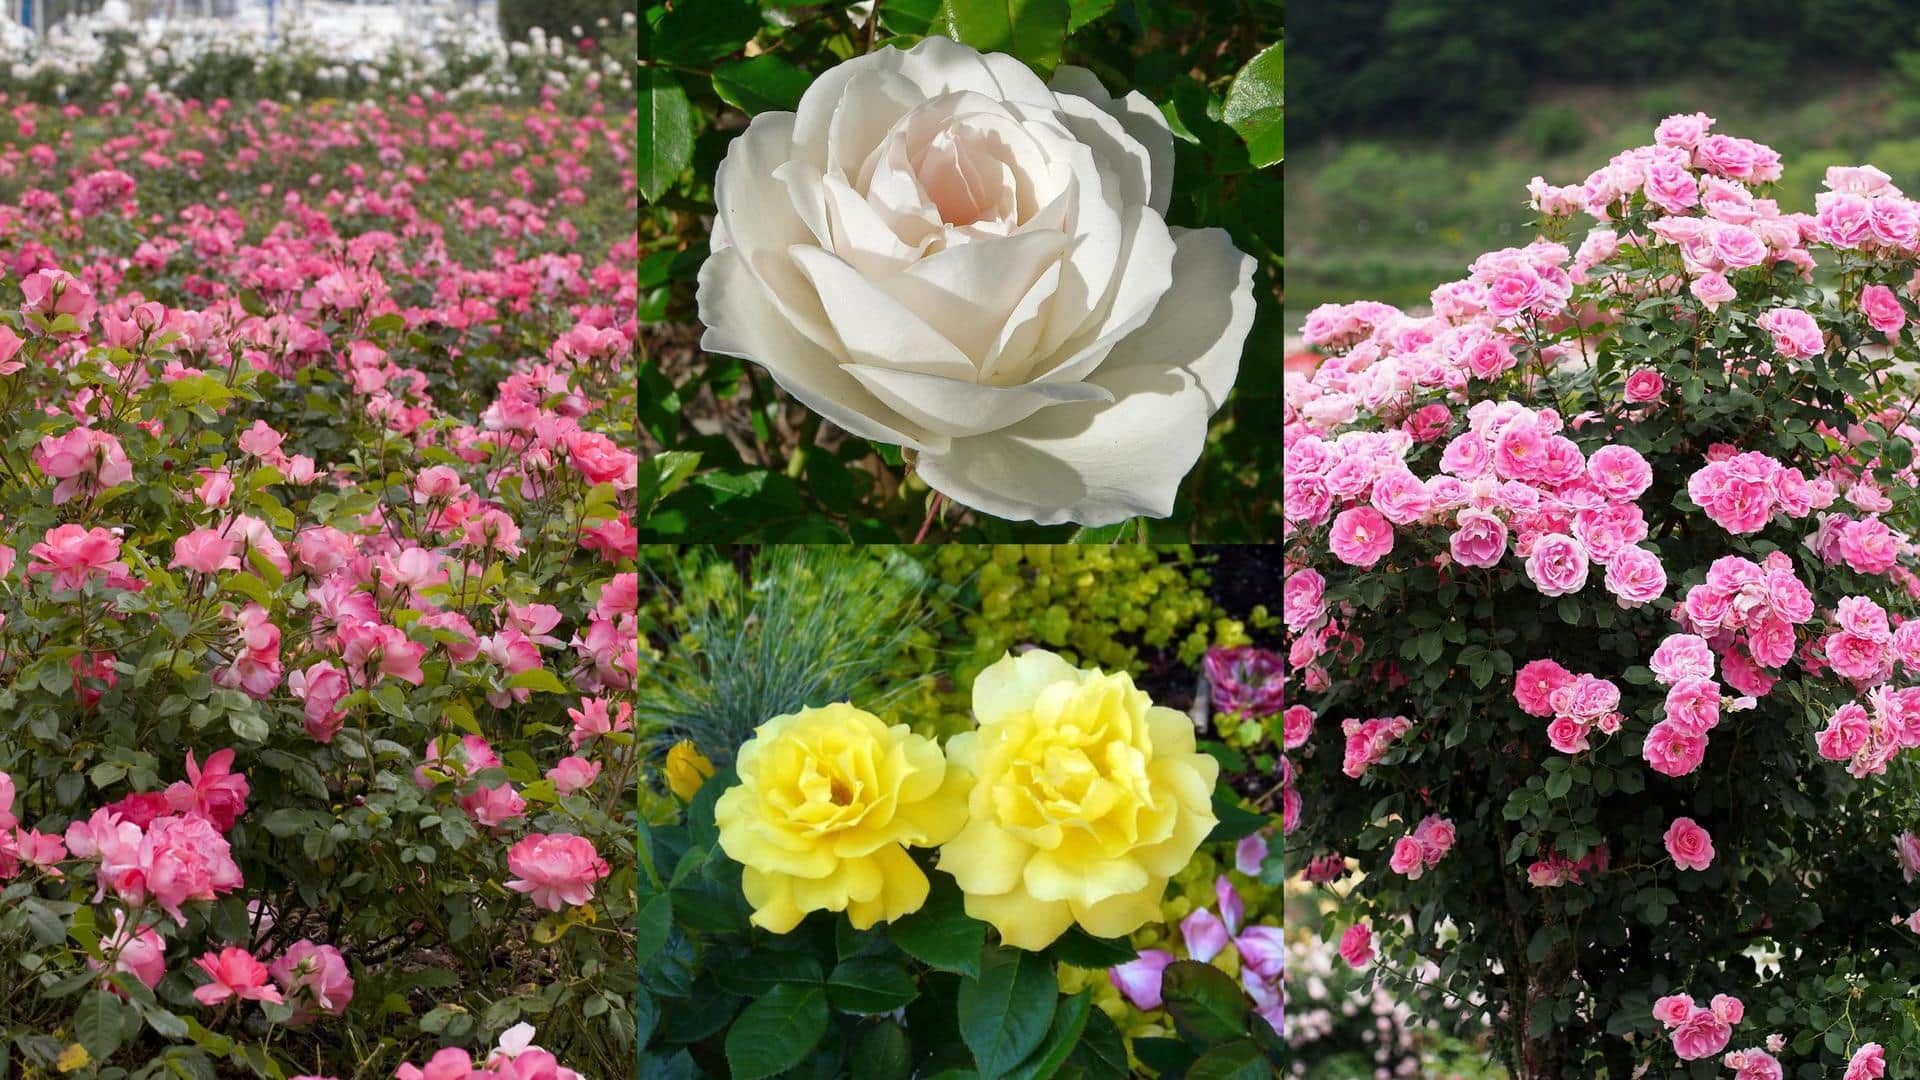 No sunlight in your garden? Bring these shade-tolerant roses